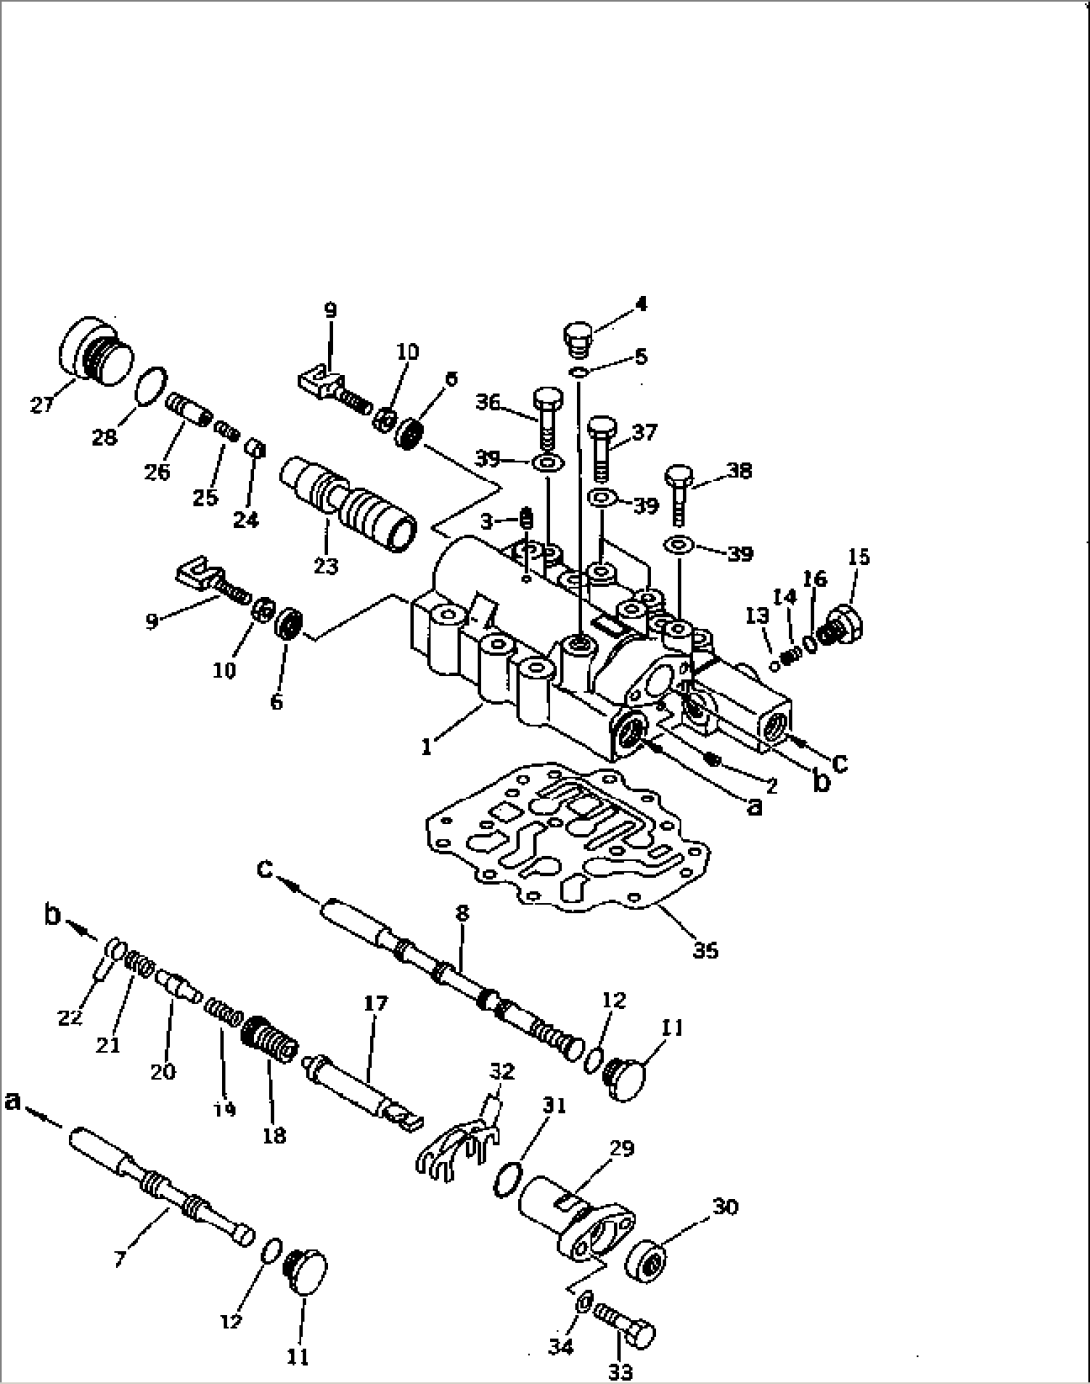 TRANSMISSION VALVE (F2-R2) (SELECTOR AND INCHING)